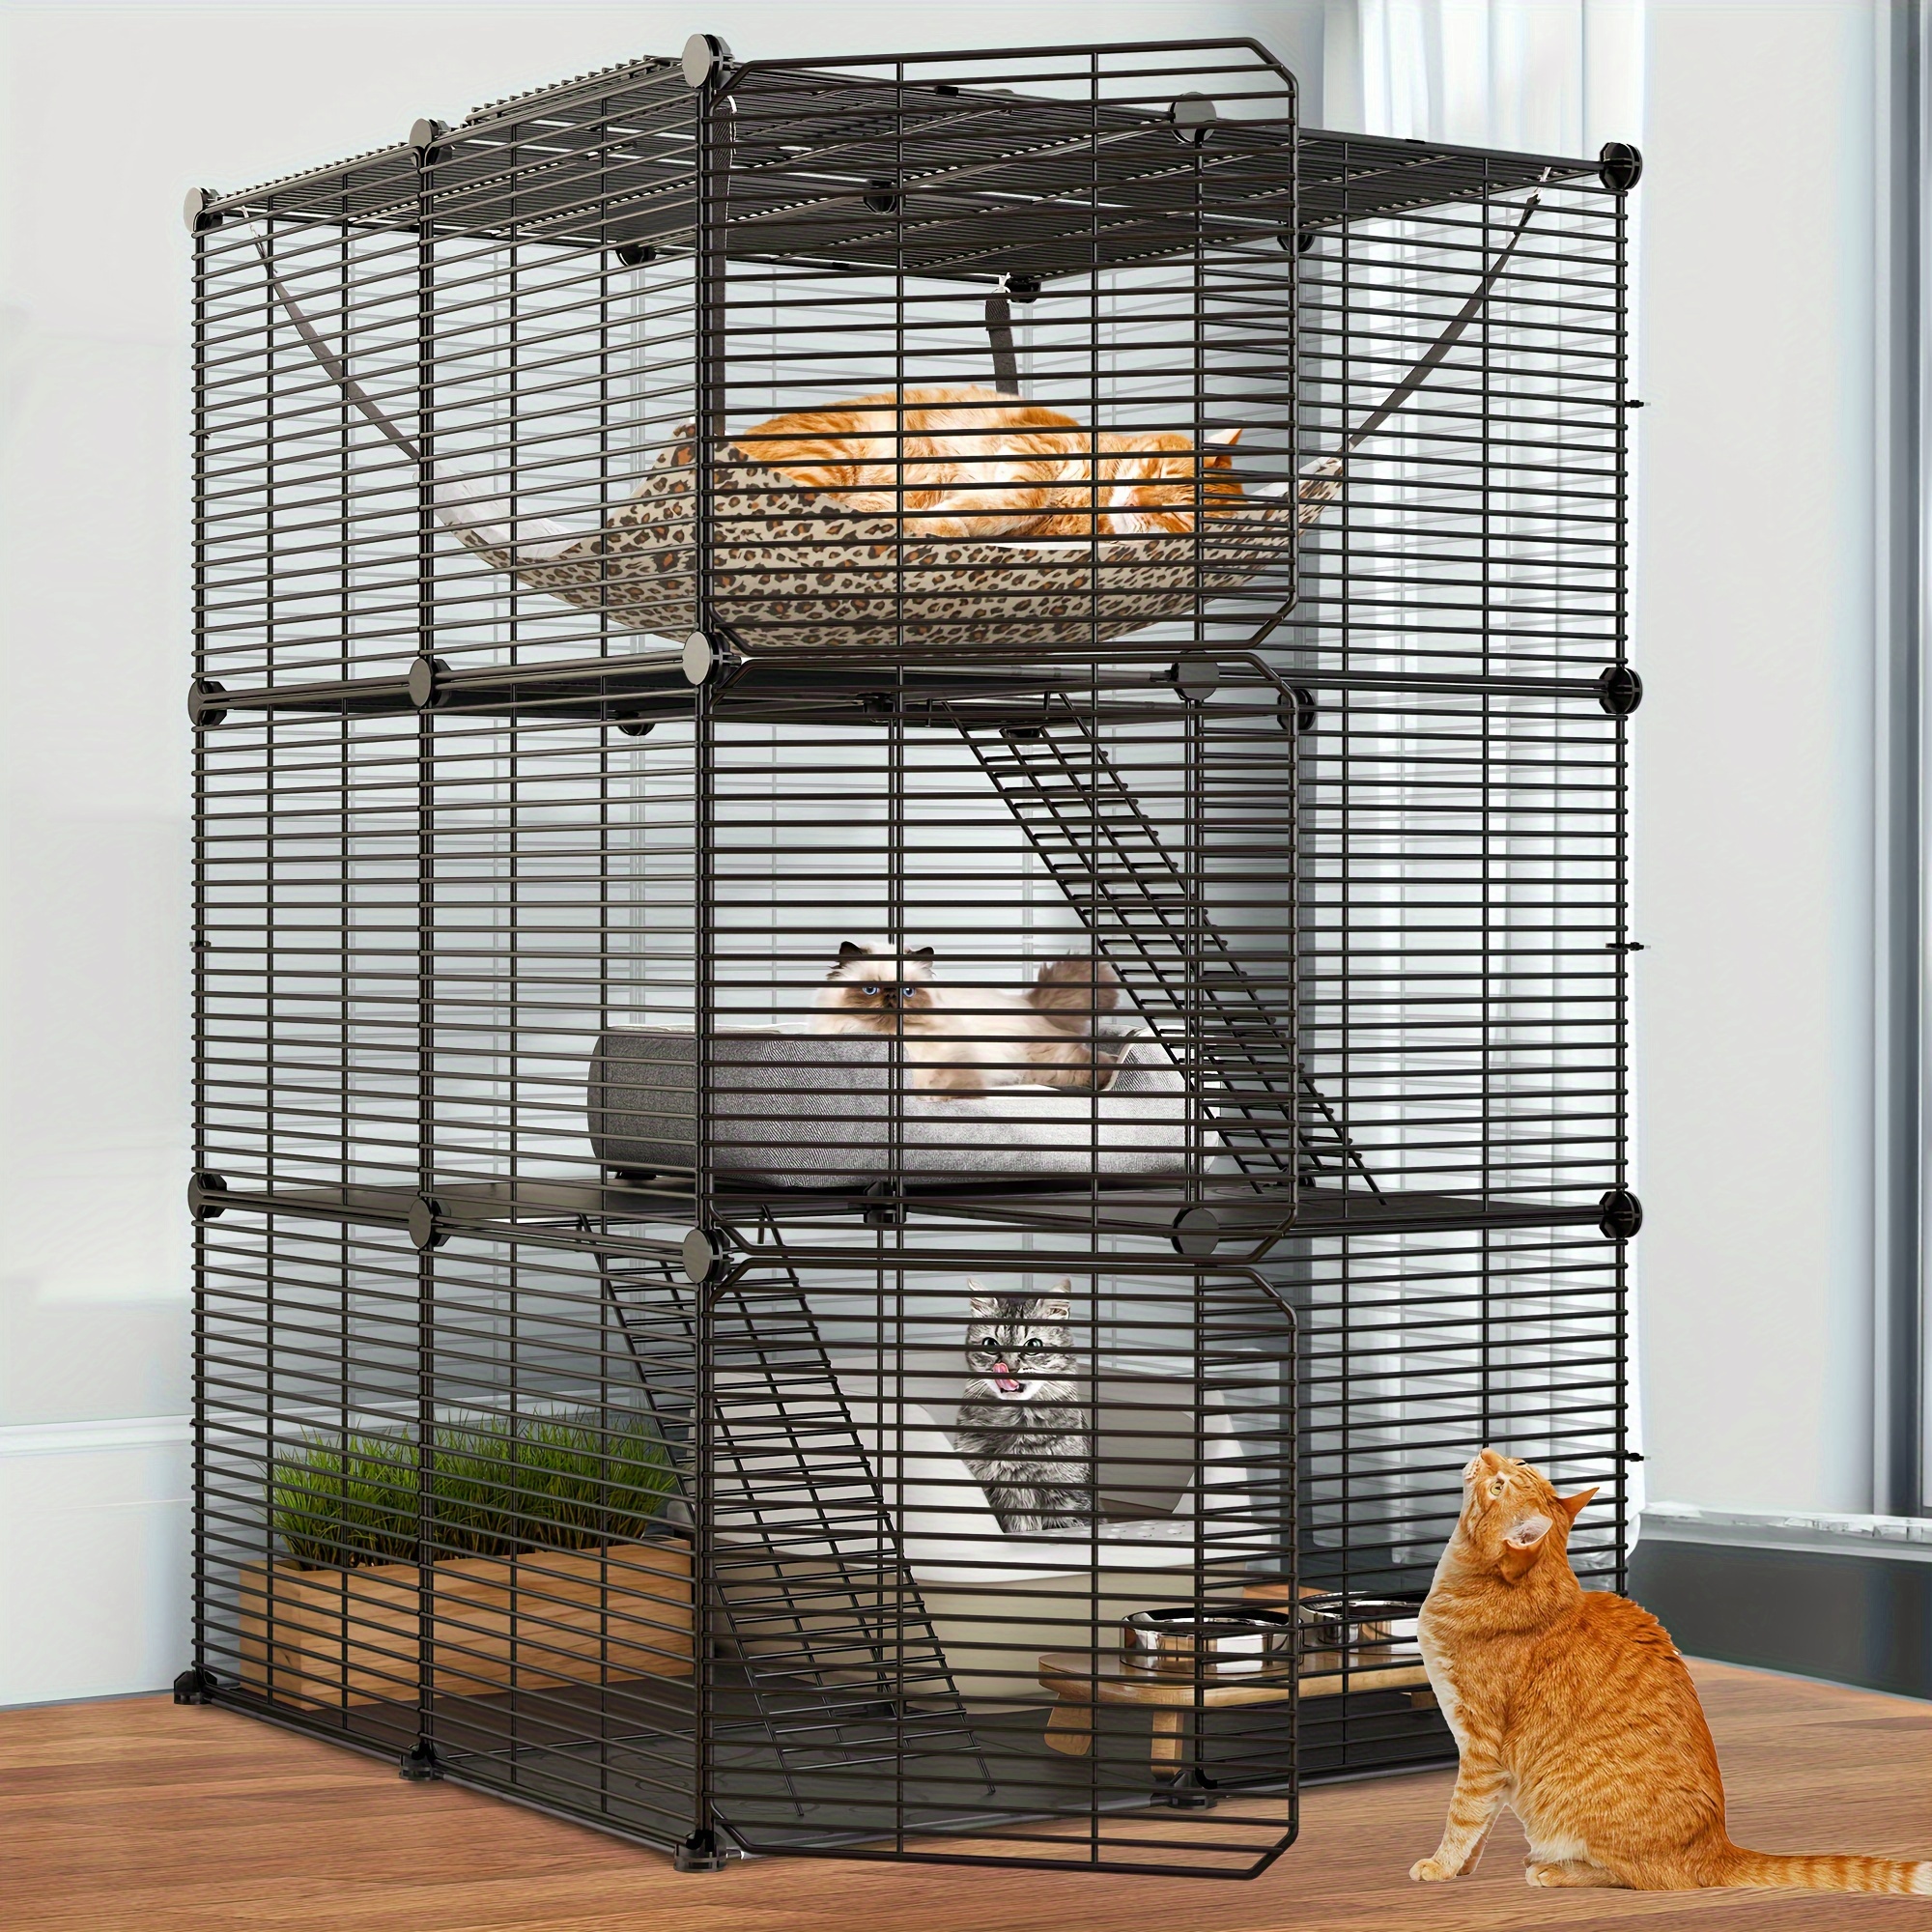 

Dwvo Cat Cage Indoor Cat Enclosures 3-tiers Diy Cat Playpen, Cat Cage With Metal Wire Dense, Cat Kennel With Extra Large Hammock For 1-2 Cats, Ferret, Chinchilla, Rabbit, Small Animals